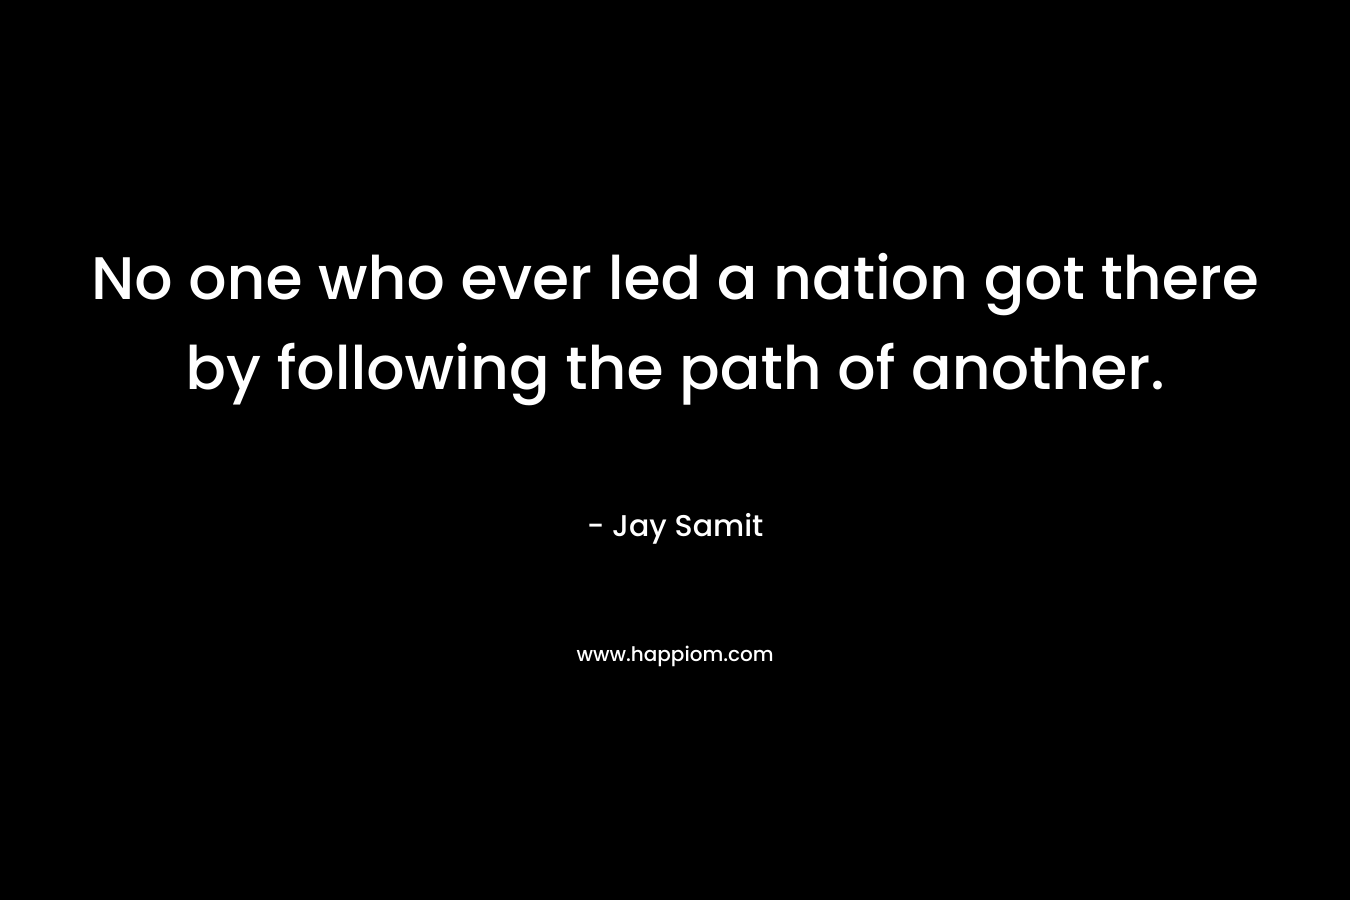 No one who ever led a nation got there by following the path of another.